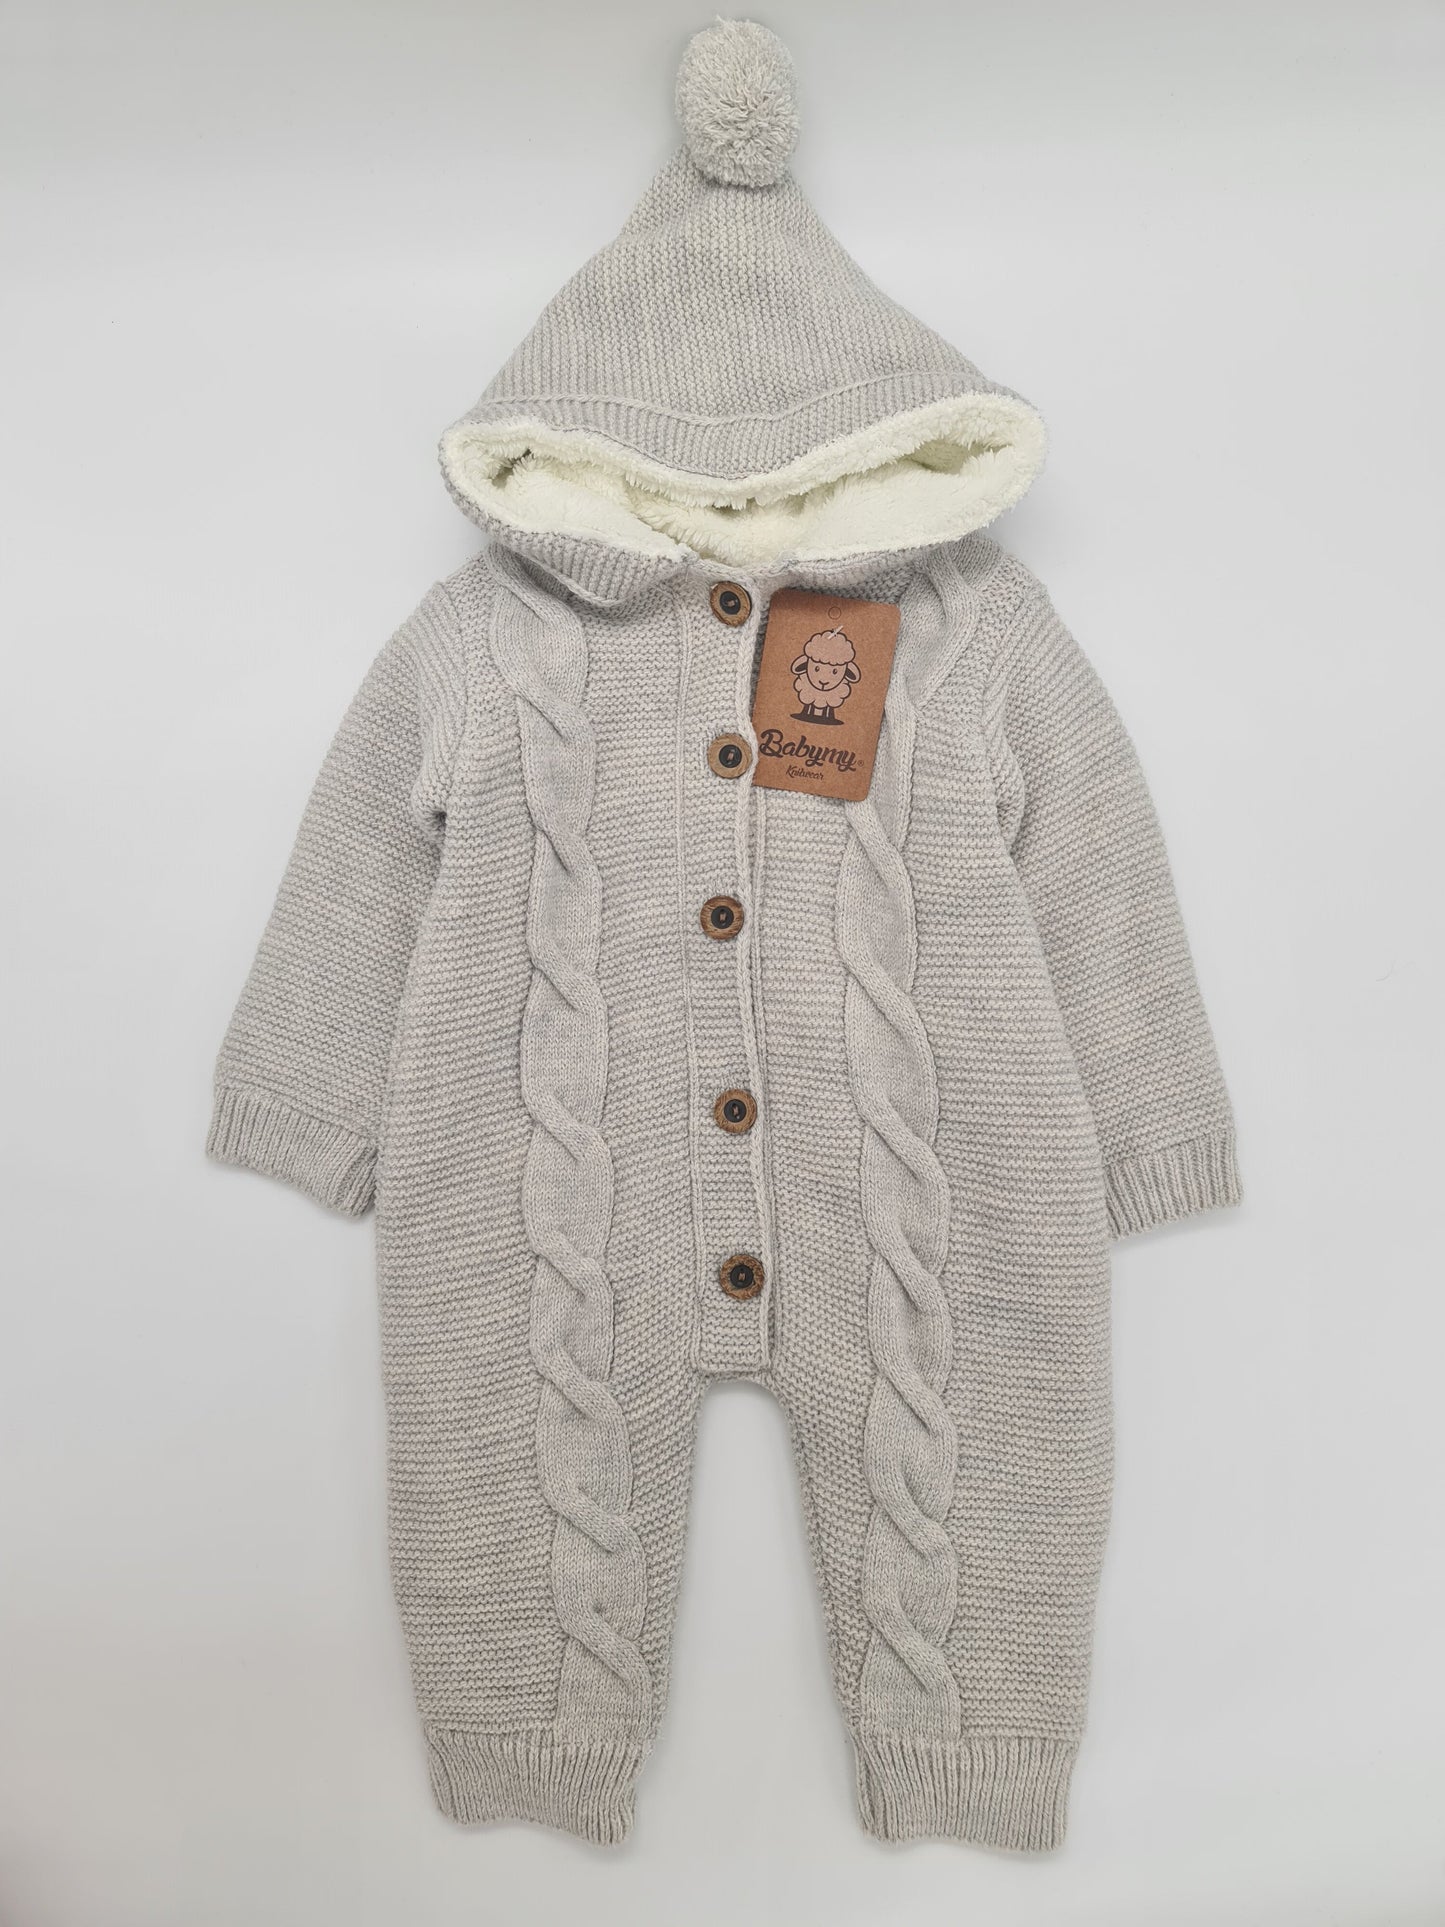 knitted jumpsuit,, baby winter clothes.